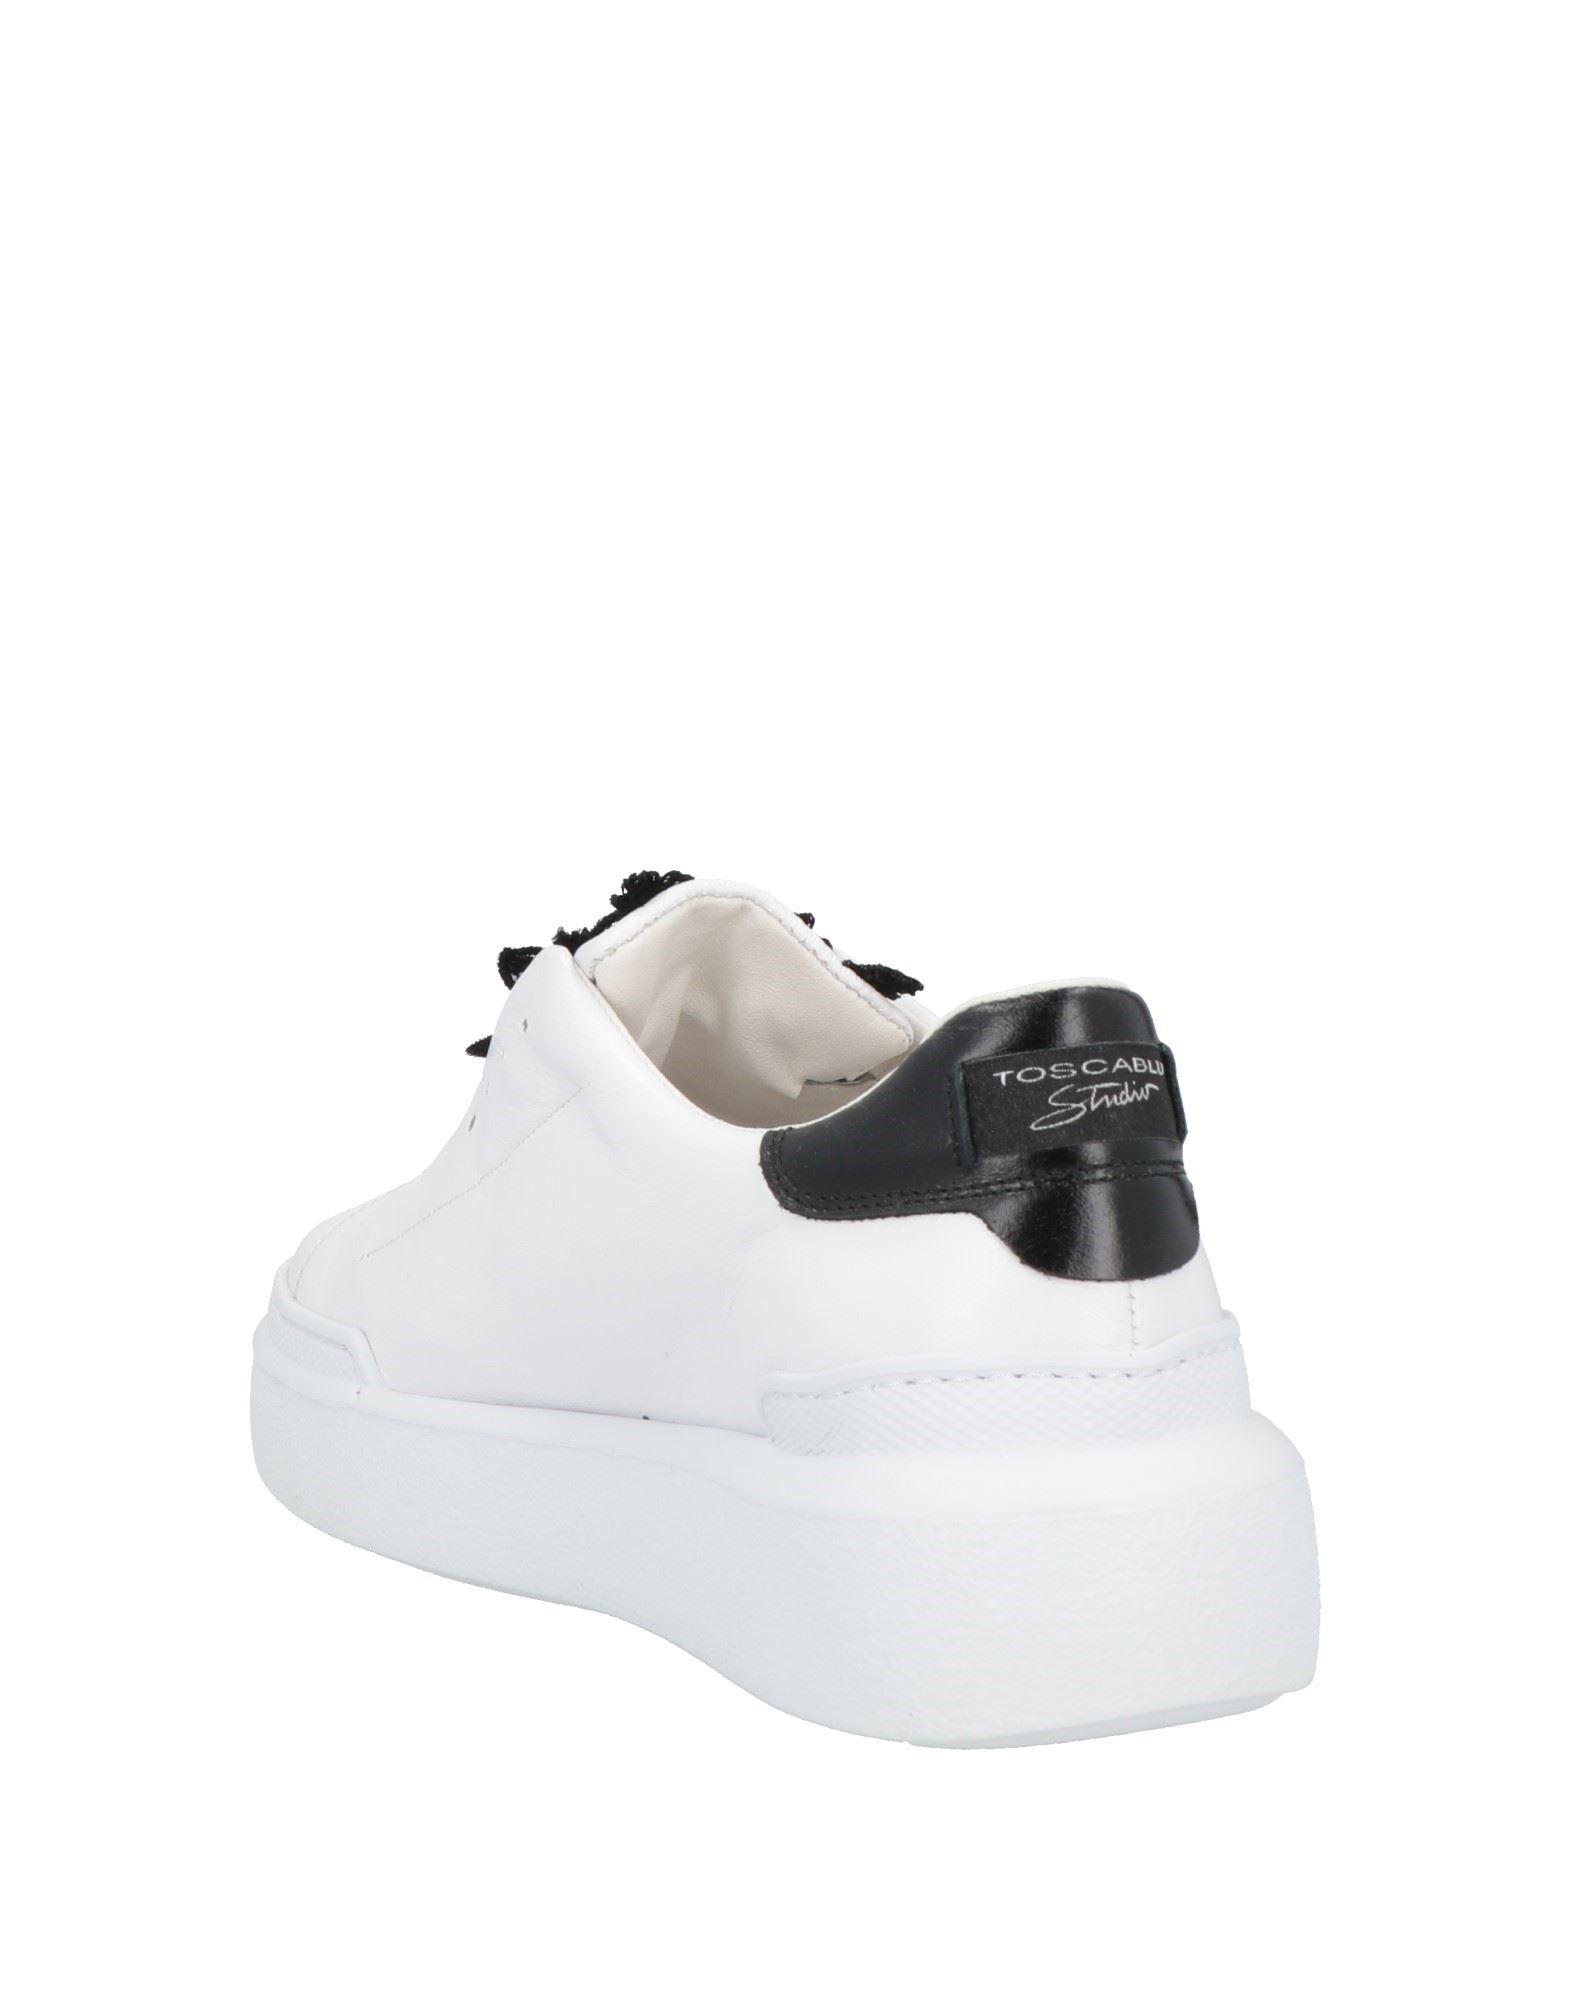 Tosca Blu Trainers in White | Lyst